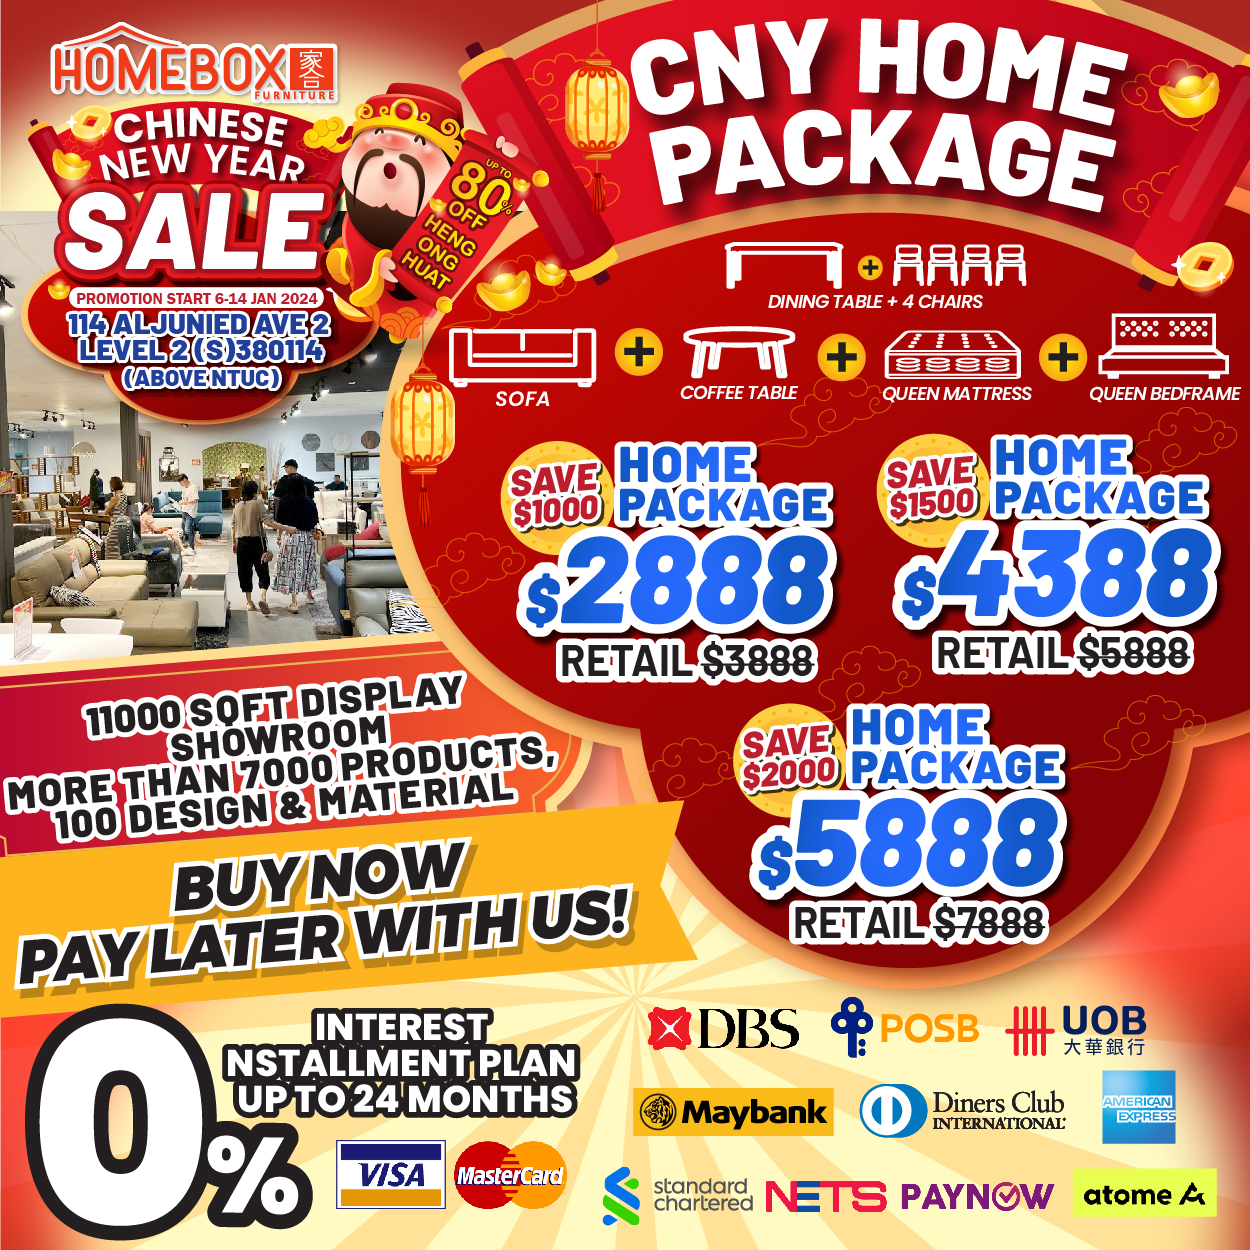 Lobang: Over 7,000 furniture to clear at this festive CNY Sale at Homebox Furniture @ Aljunied from now till 14 Jan 24; up to 80% off and guaranteed delivery before CNY - 5